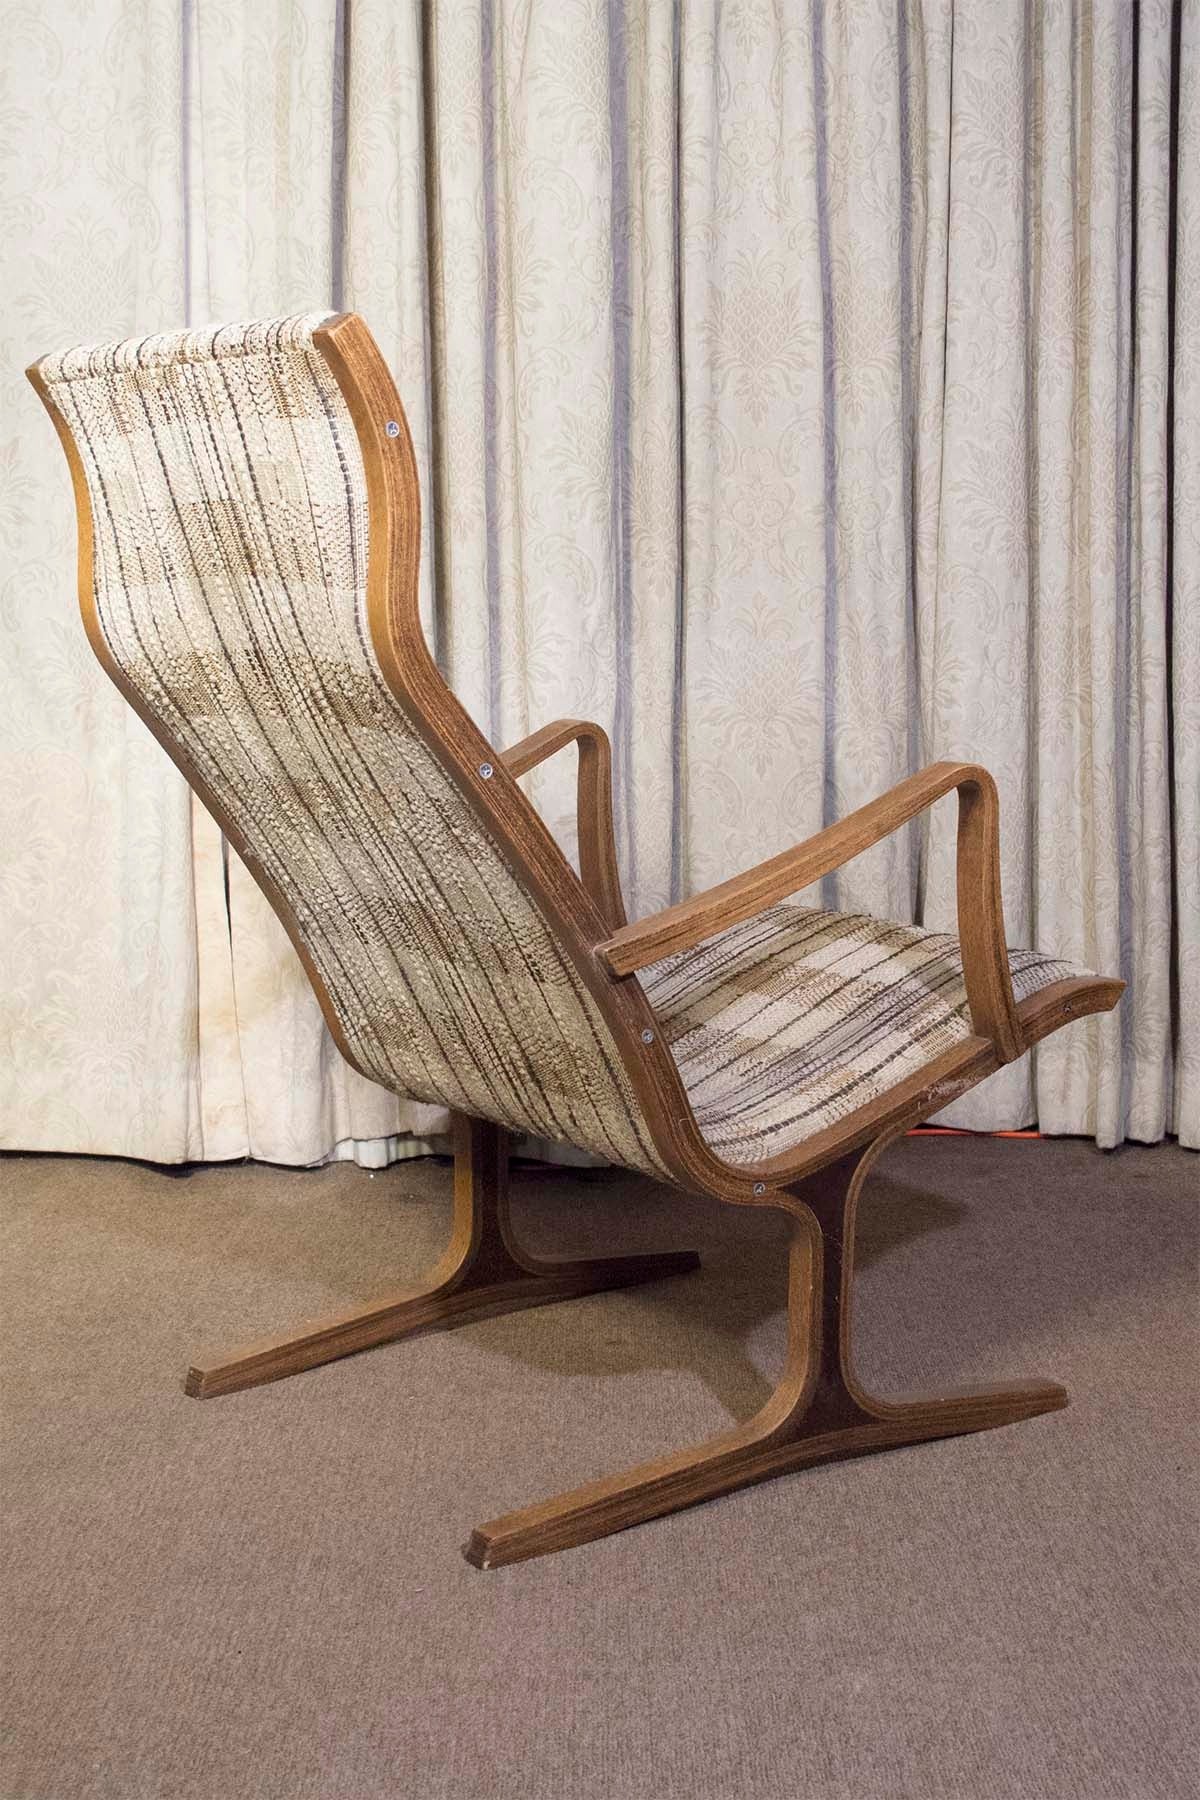 # ZA645 - Tendo Mokko designed armchair and rocker. The,
60 year old Japanese firm, known for ply and bentwood furniture, are best known for manufacturing the warm and Minimalist Butterfly Stool by Sori Yanagi. All their pieces exude exquisite